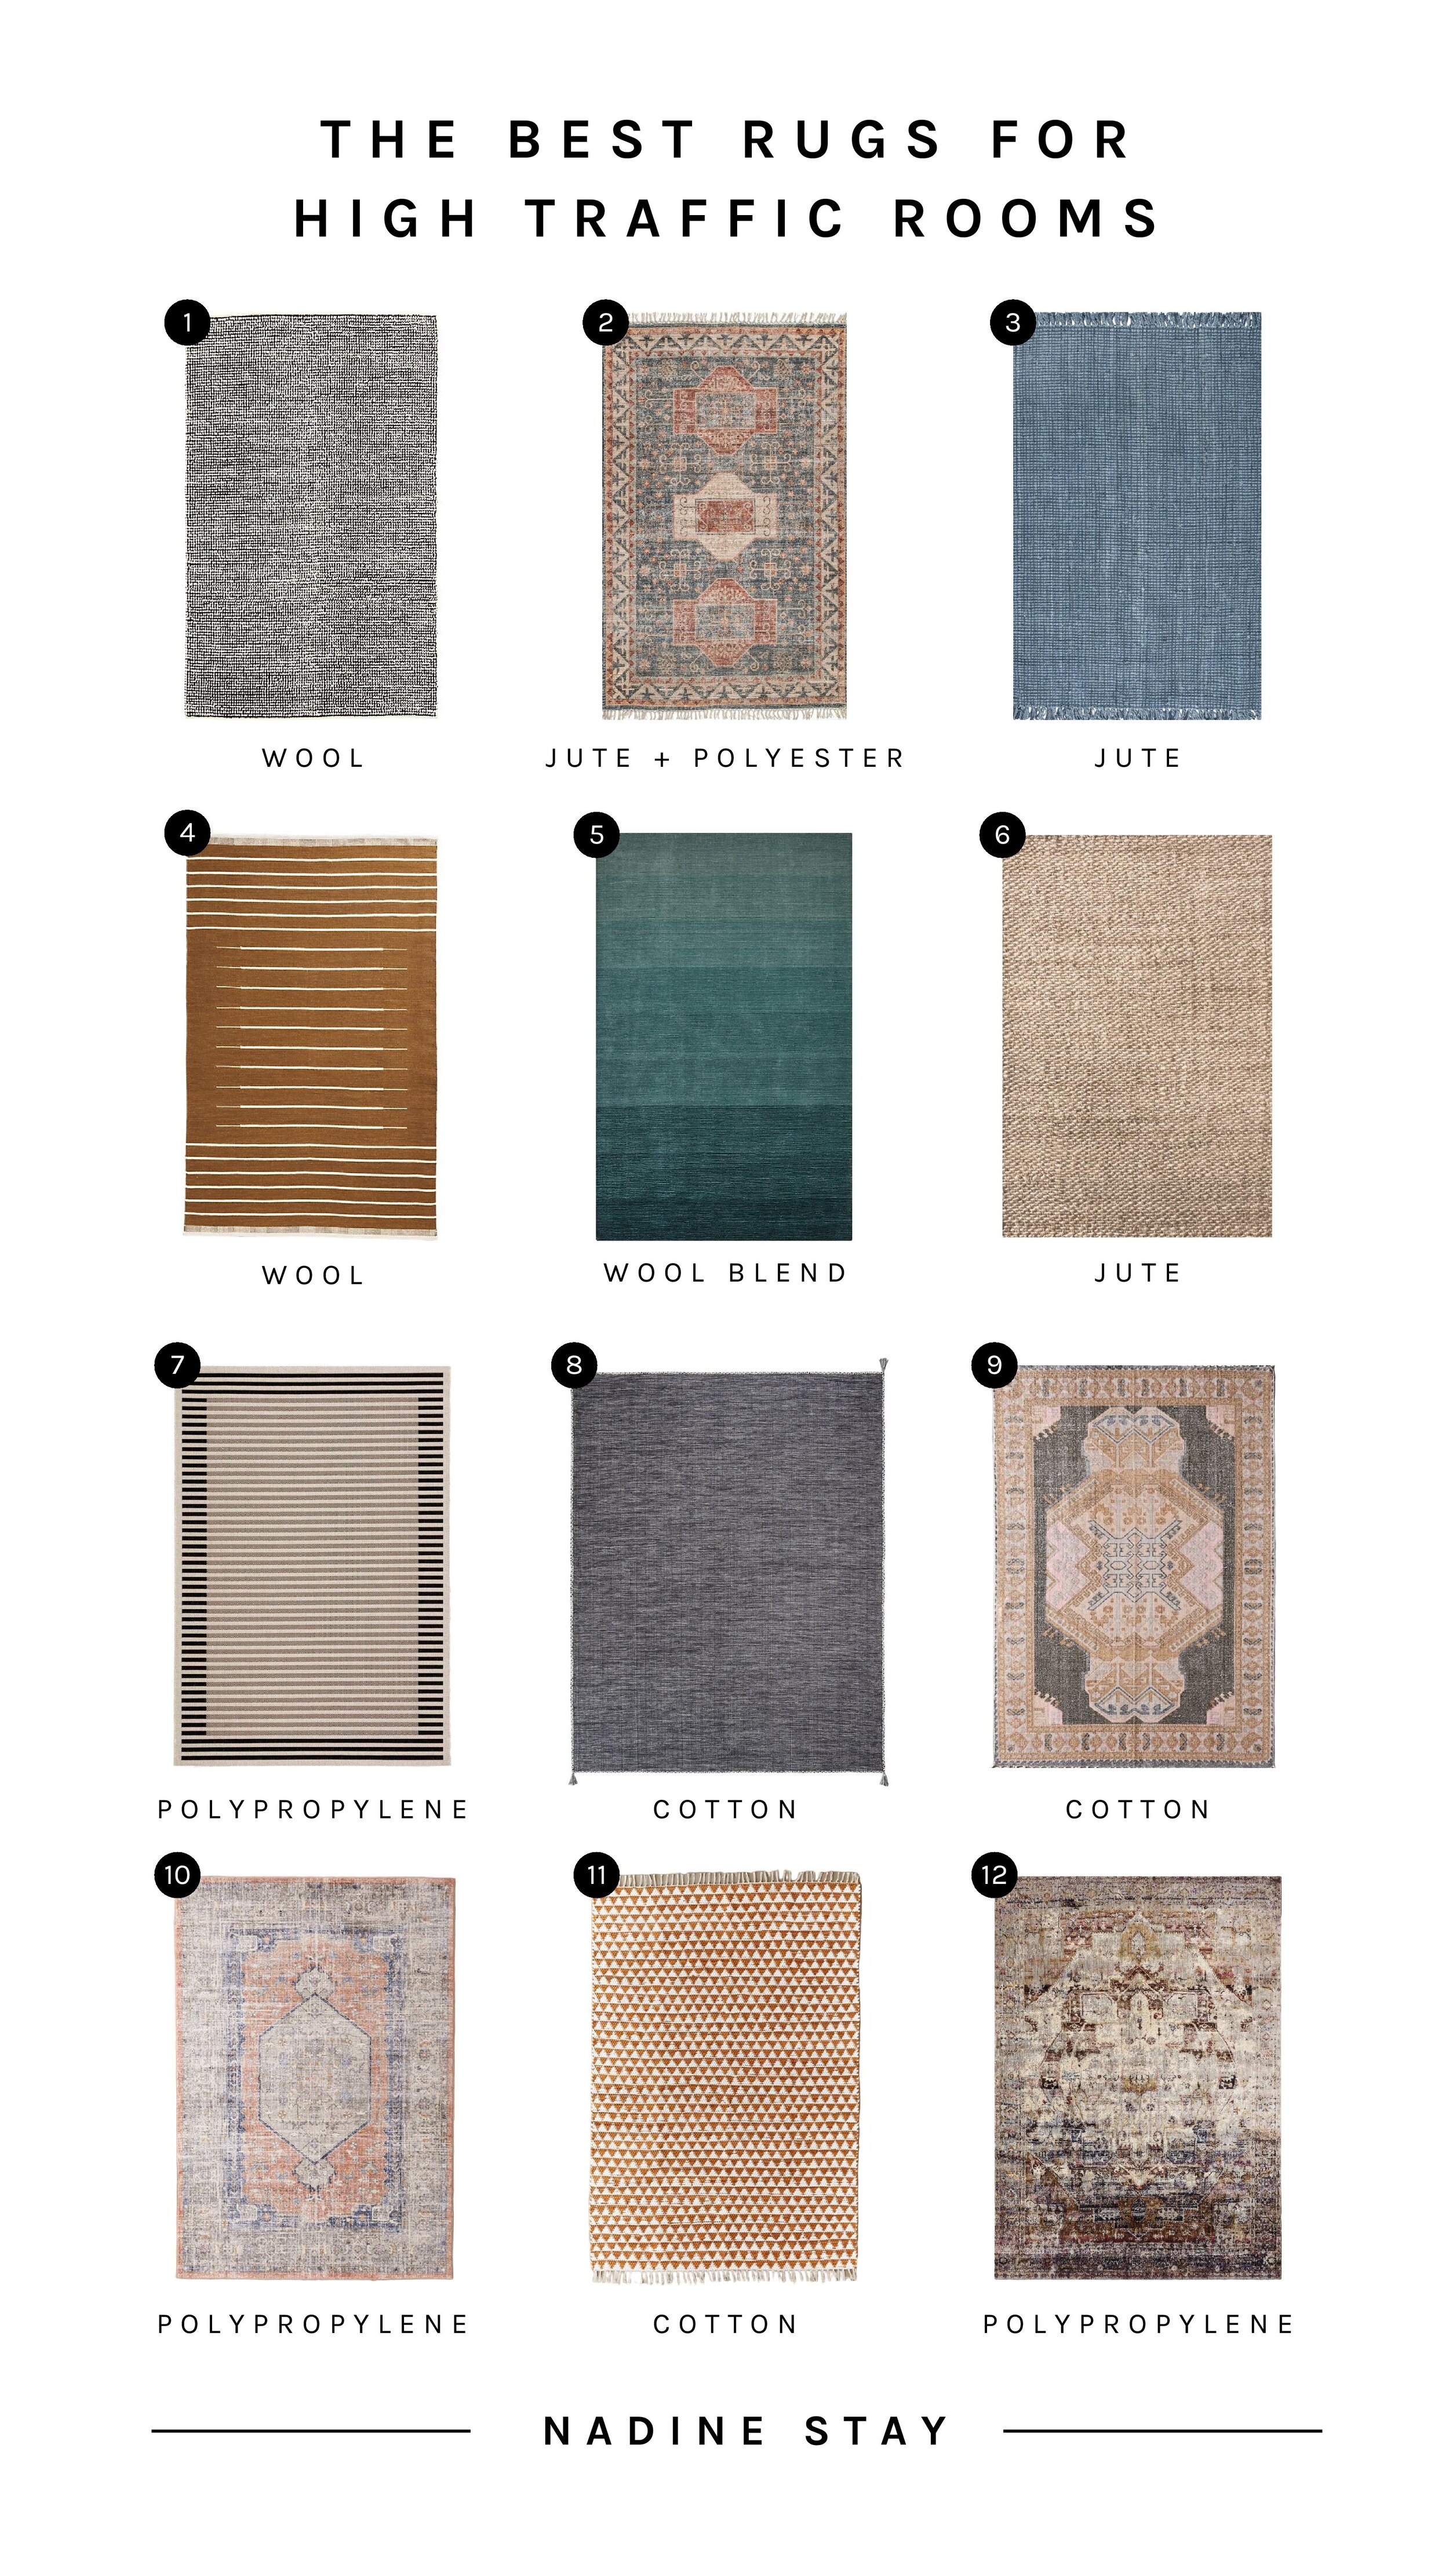 The best (and worst) rugs for high traffic rooms | Nadine Stay | Wool, Polypropylene, cotton, jute or sisal, and synthentic materials are best for heavy foot traffic